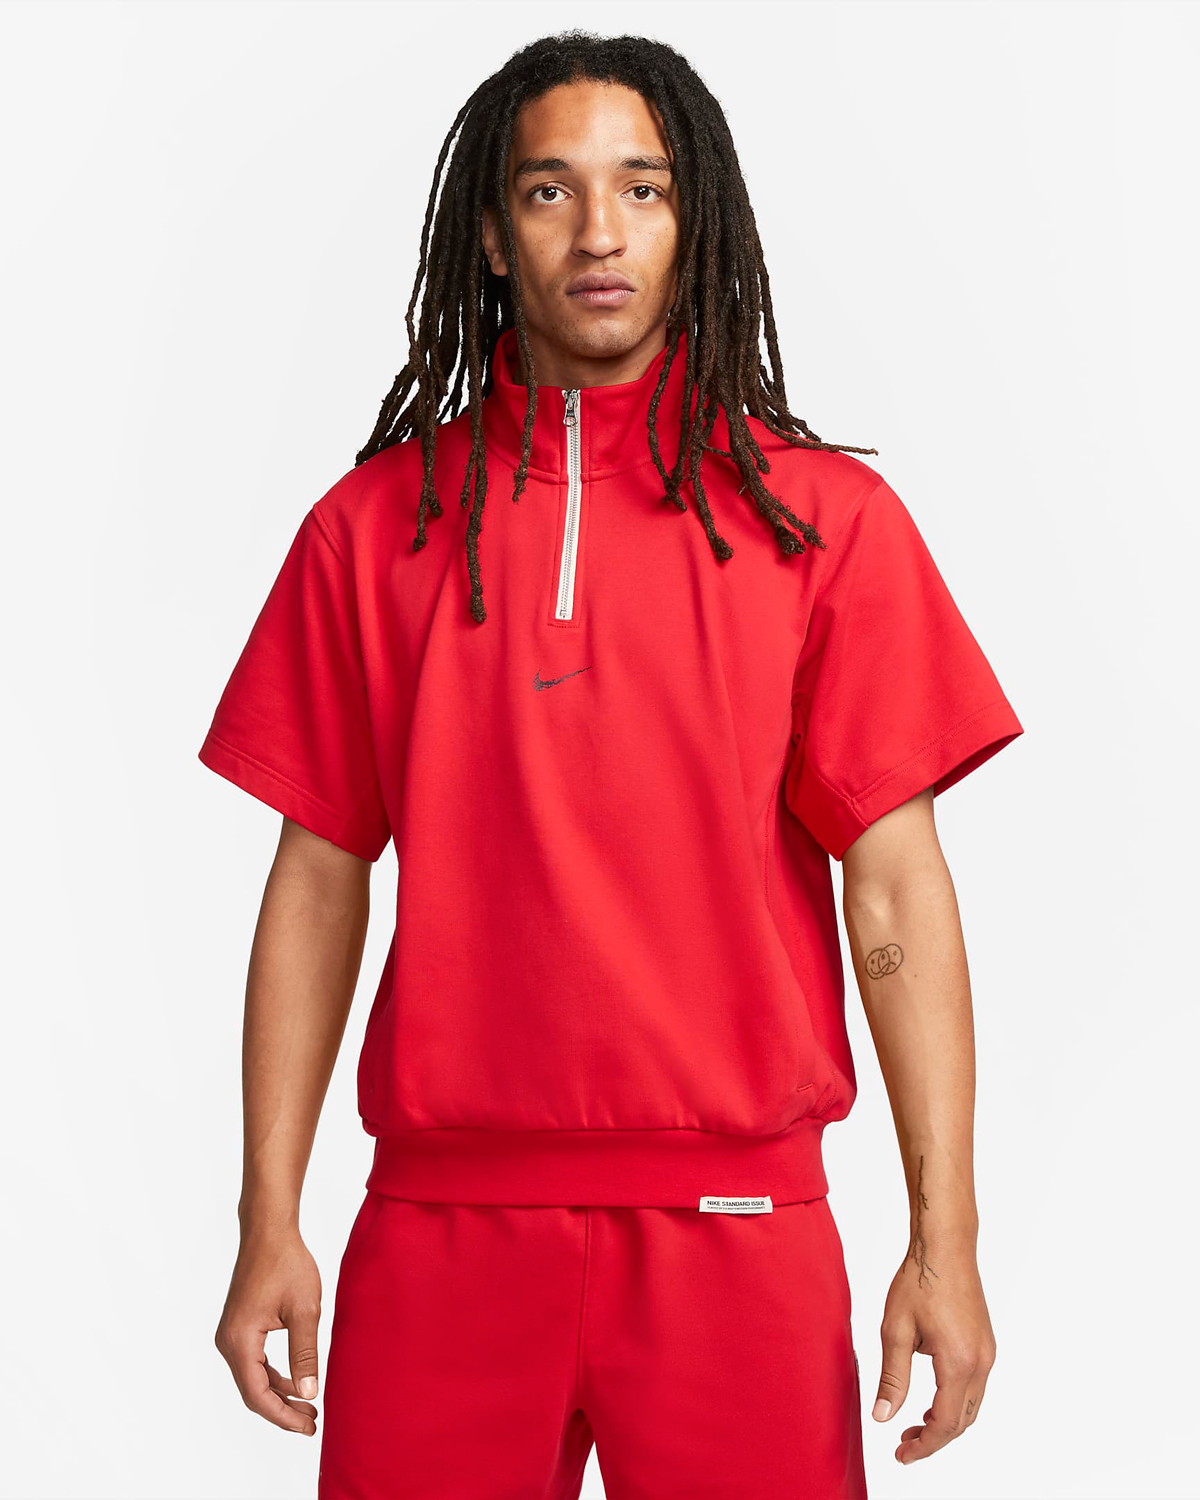 Nike-Standard-Issue-Basketball-Top-University-Red